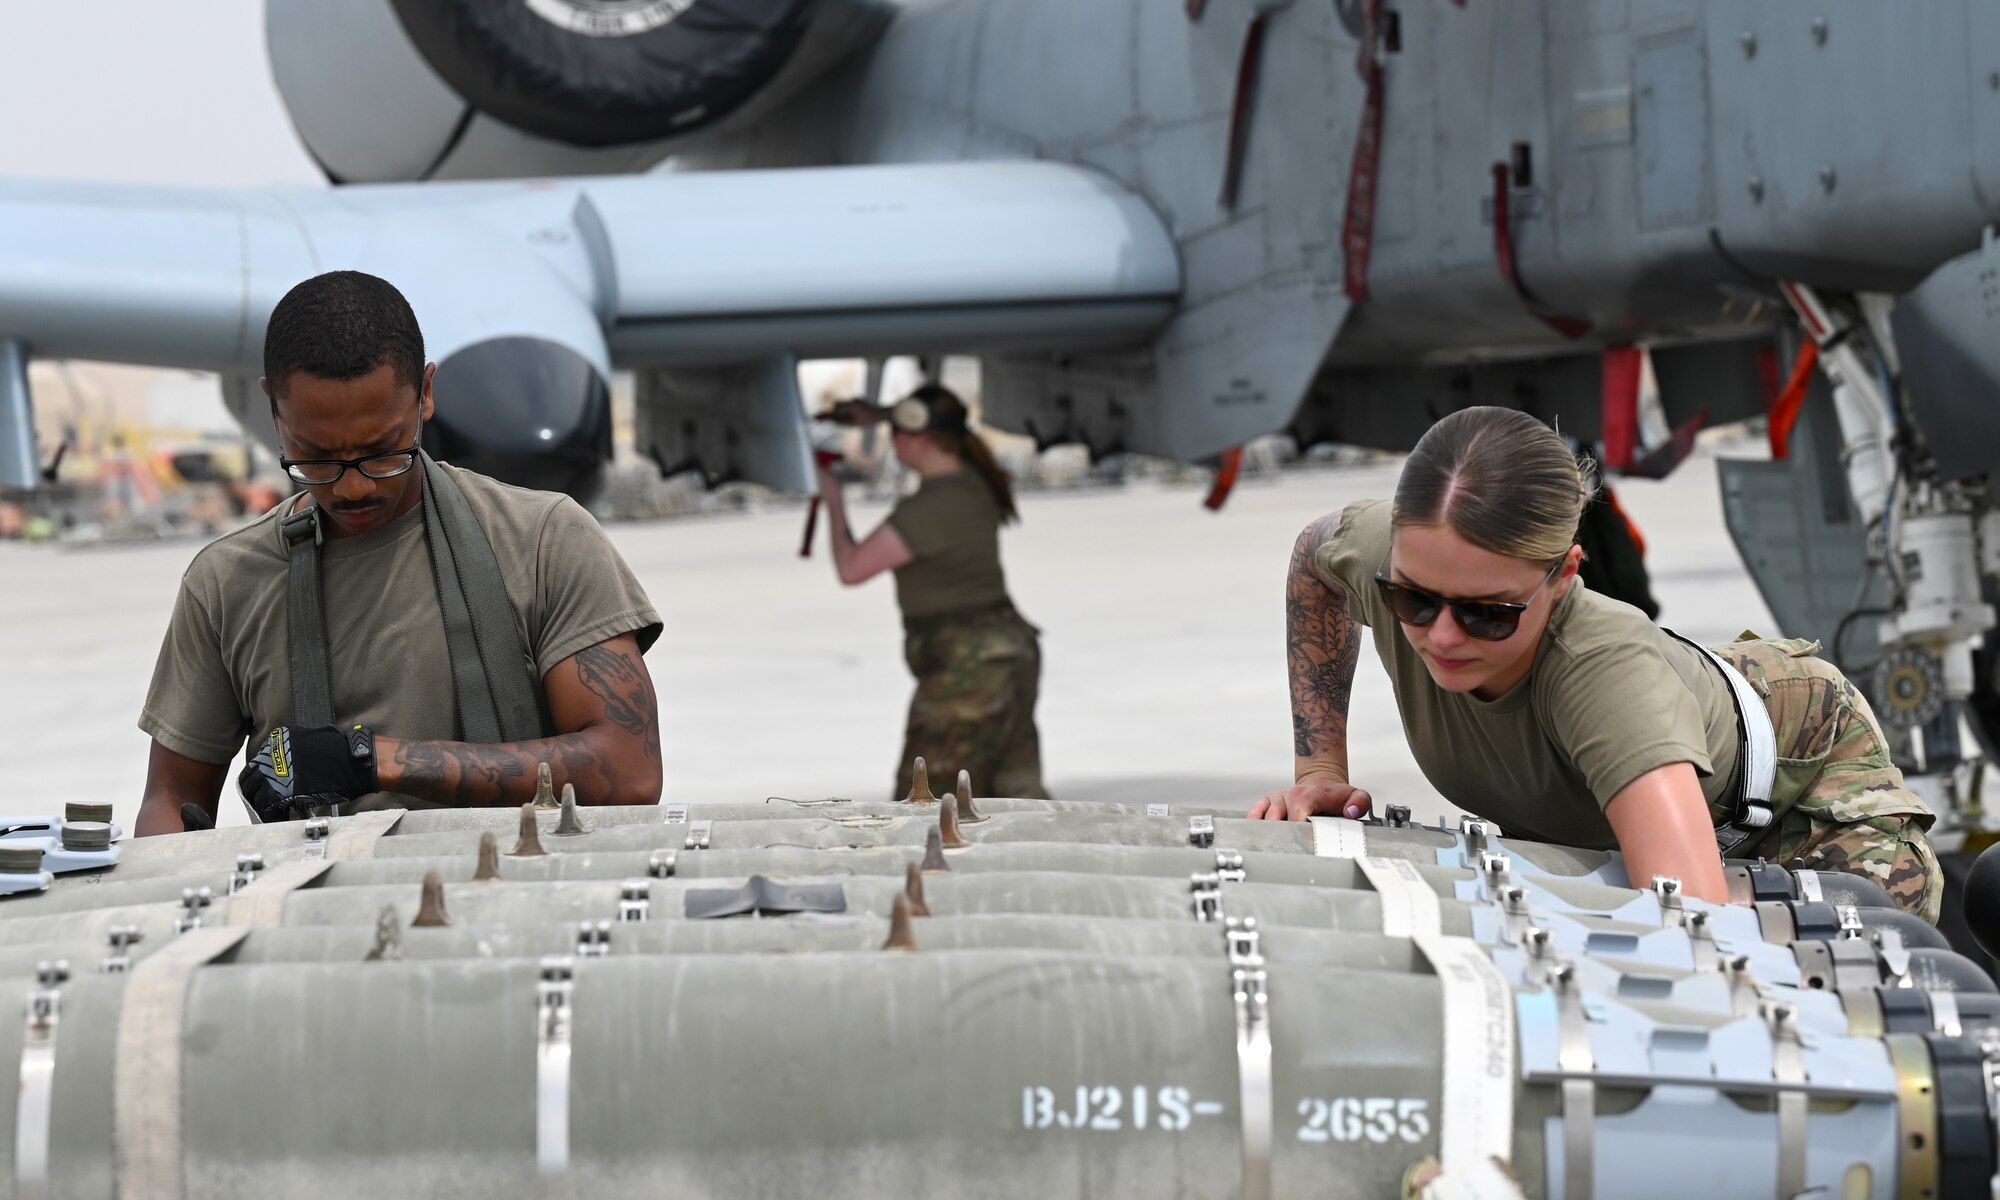 U.S. Air Force Staff Sgt. Brian Dorsey and Senior Airman Reese Deandrea, 75th Expeditionary Fighter Generation Squadron, squadron lead crew chief and member, prepare munitions to be loaded onto a U.S. Air Force A-10 Thunderbolt II at Al Dhafra Air Base, United Arab Emirates, April 18, 2022. The loading of these munitions represents another step forward in the deployment of the A-10 to the U.S. Central Command area of responsibility, which offers the opportunity for 9th Air Force (Air Forces Central). to experiment with CAS capabilities in order to achieve the most robust, diverse force possible. Ninth AF (AFCENT) is committed to ensuring security and stability alongside our partners in the U.S. Central Command area of responsibility. (U.S. Air Force photo by Tech. Sgt. Alex Fox Echols III)